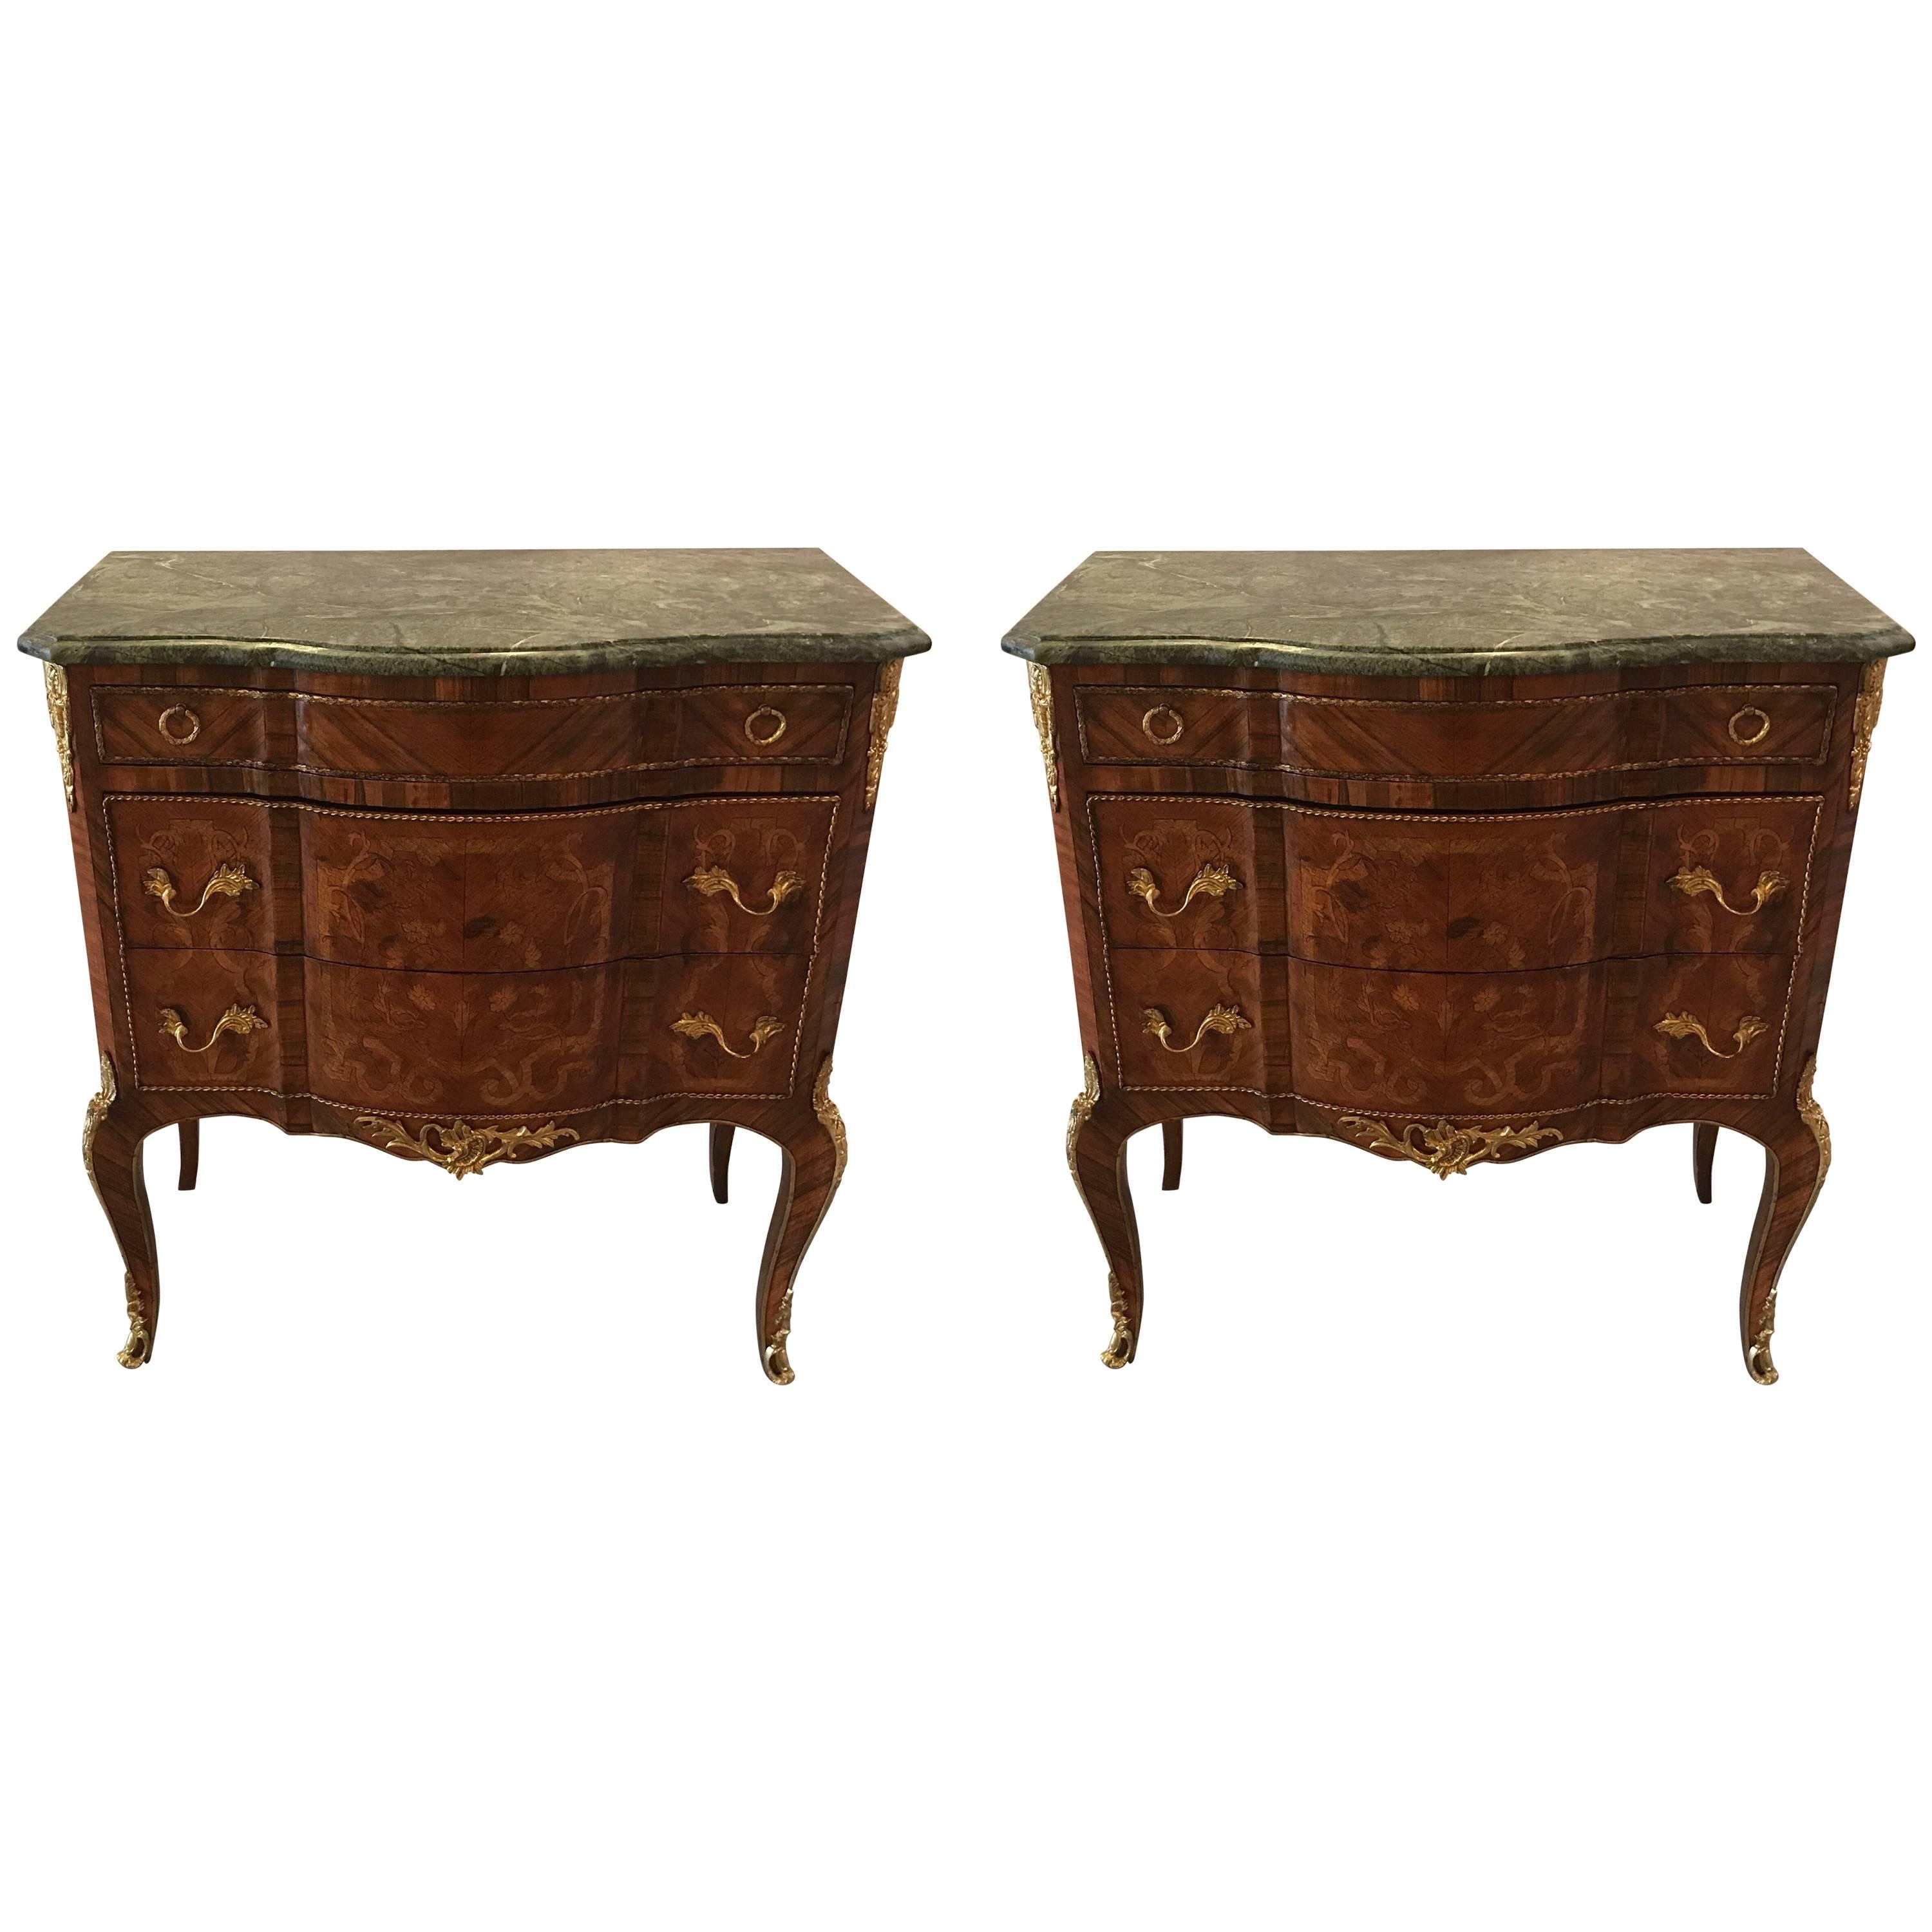 Pair of French Marble-Top Commodes